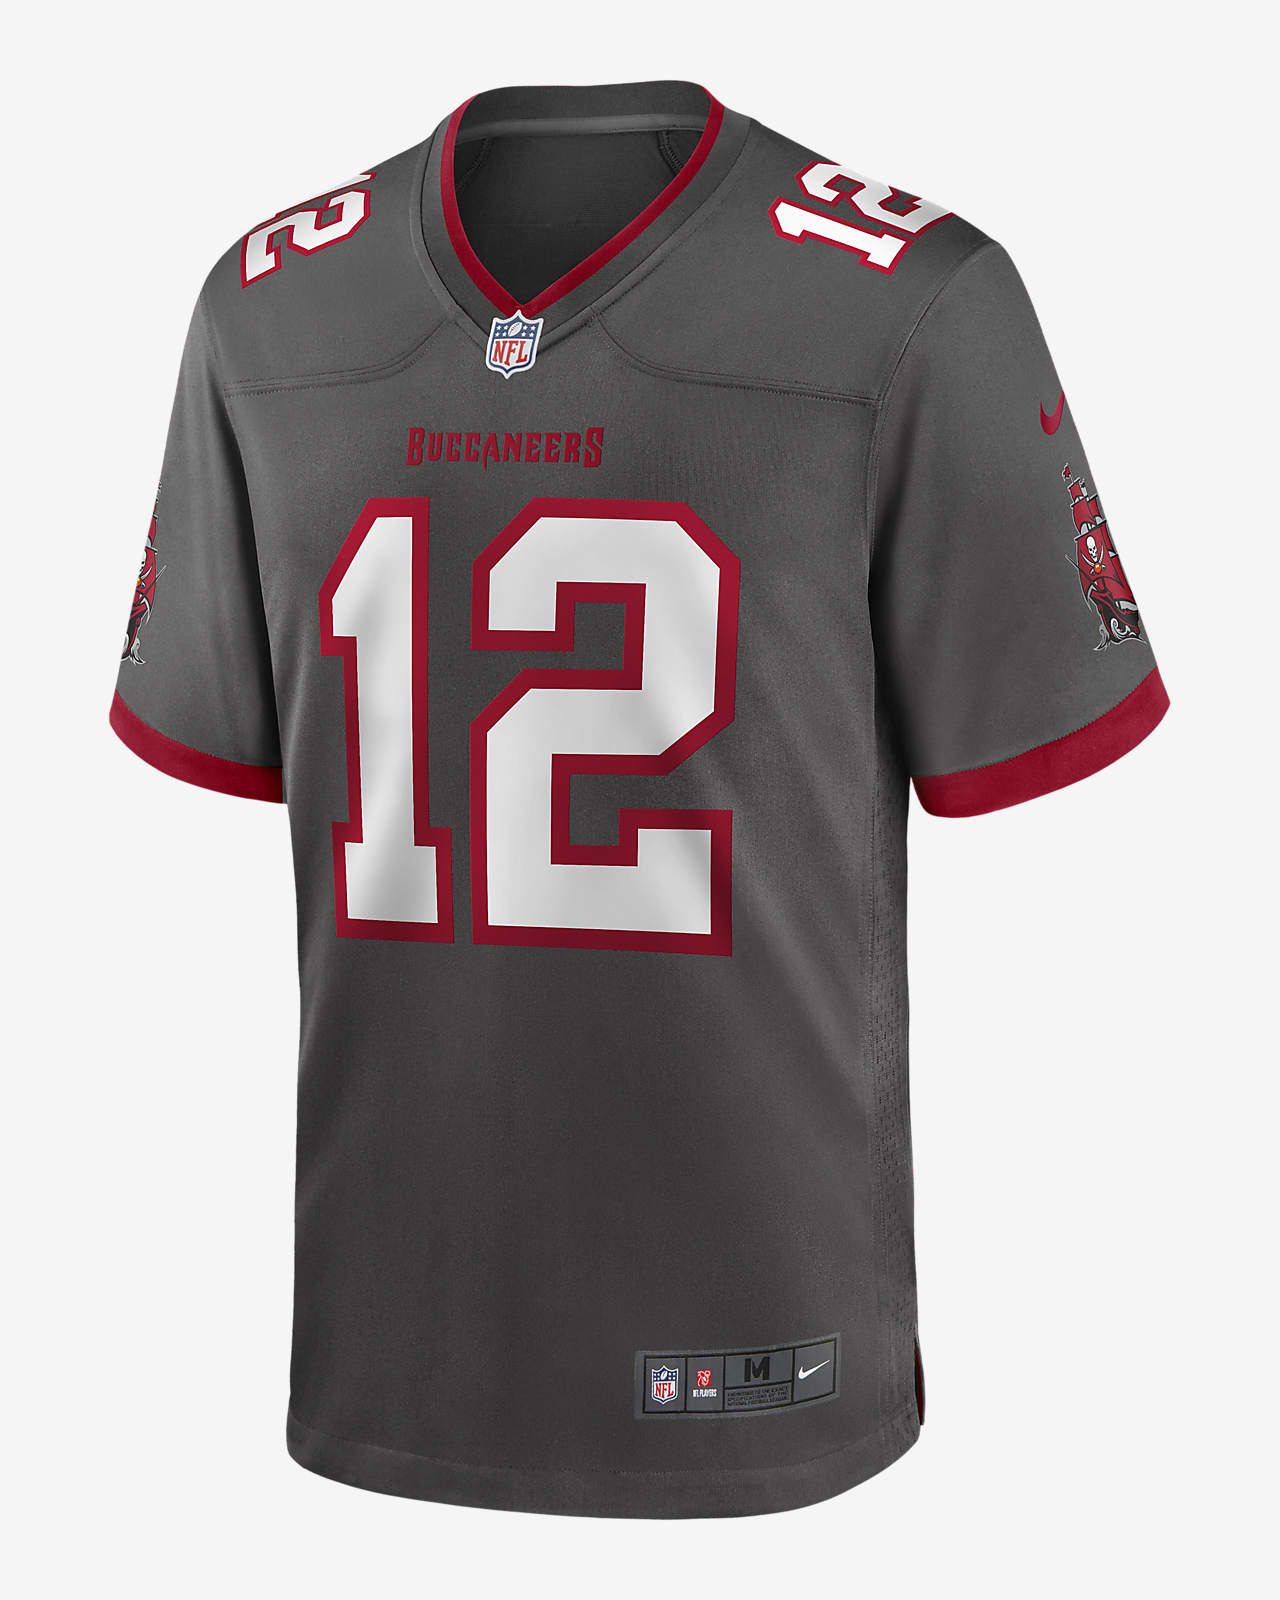 nike nfl game day jersey